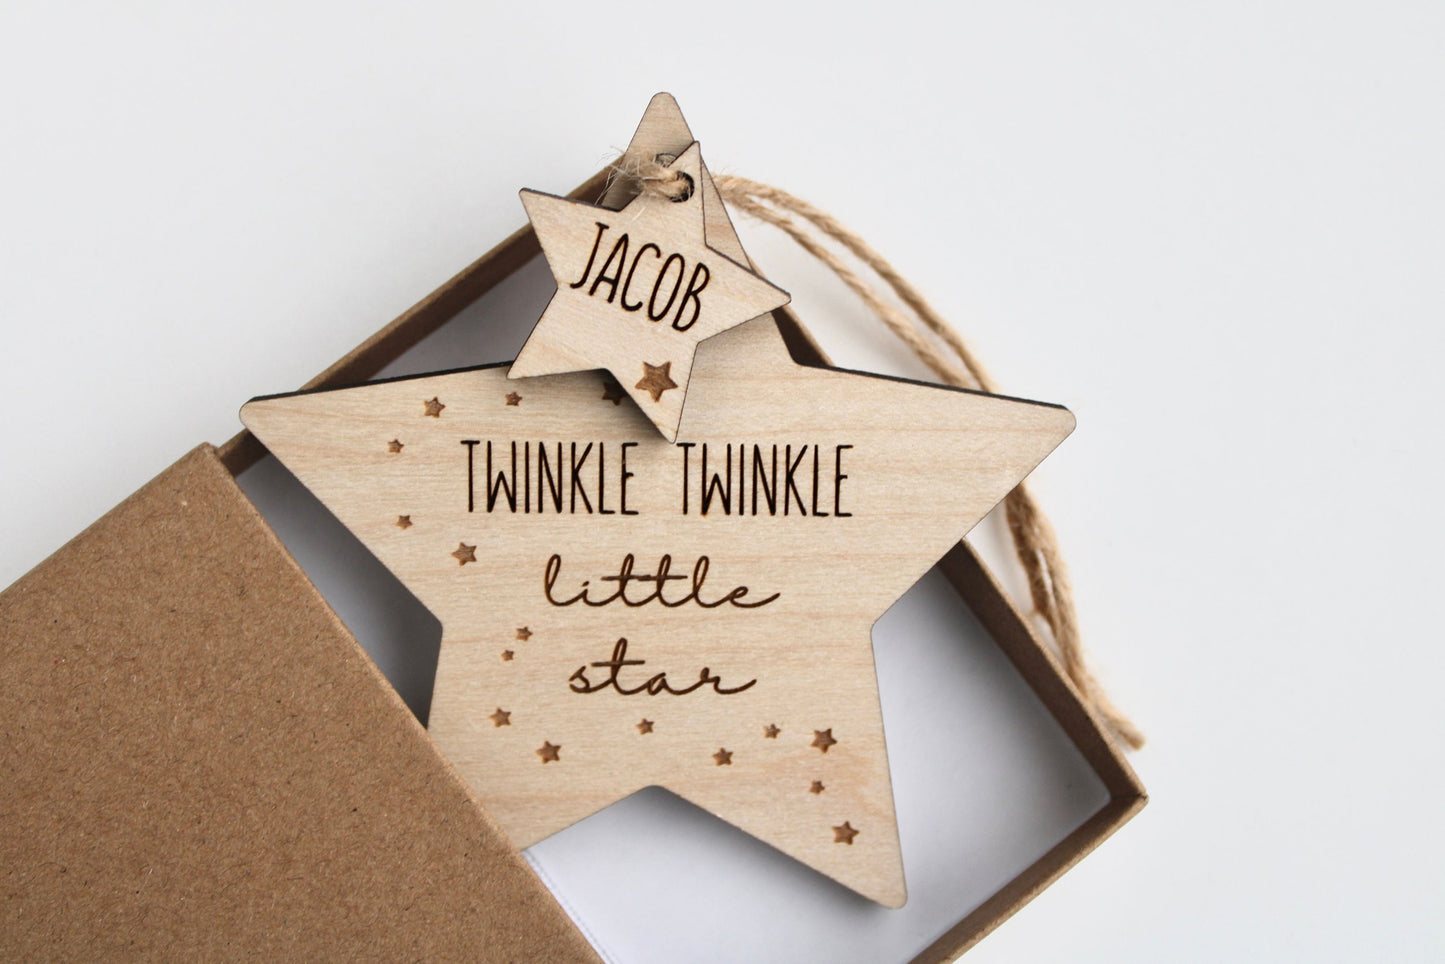 Twinkle Twinkle Little Star personalised christening or new baby gift